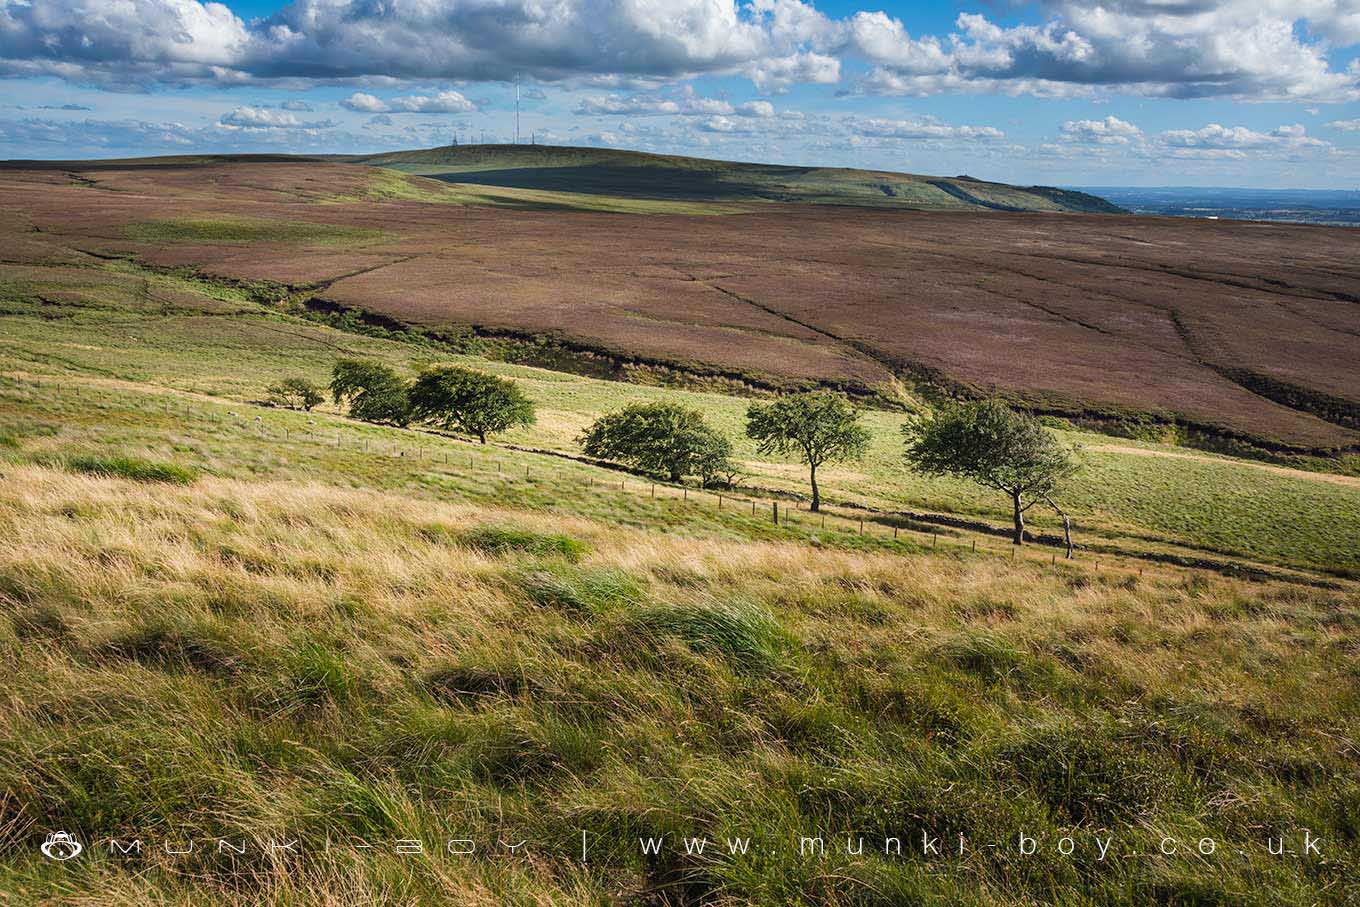 Hiking Areas in Lancashire